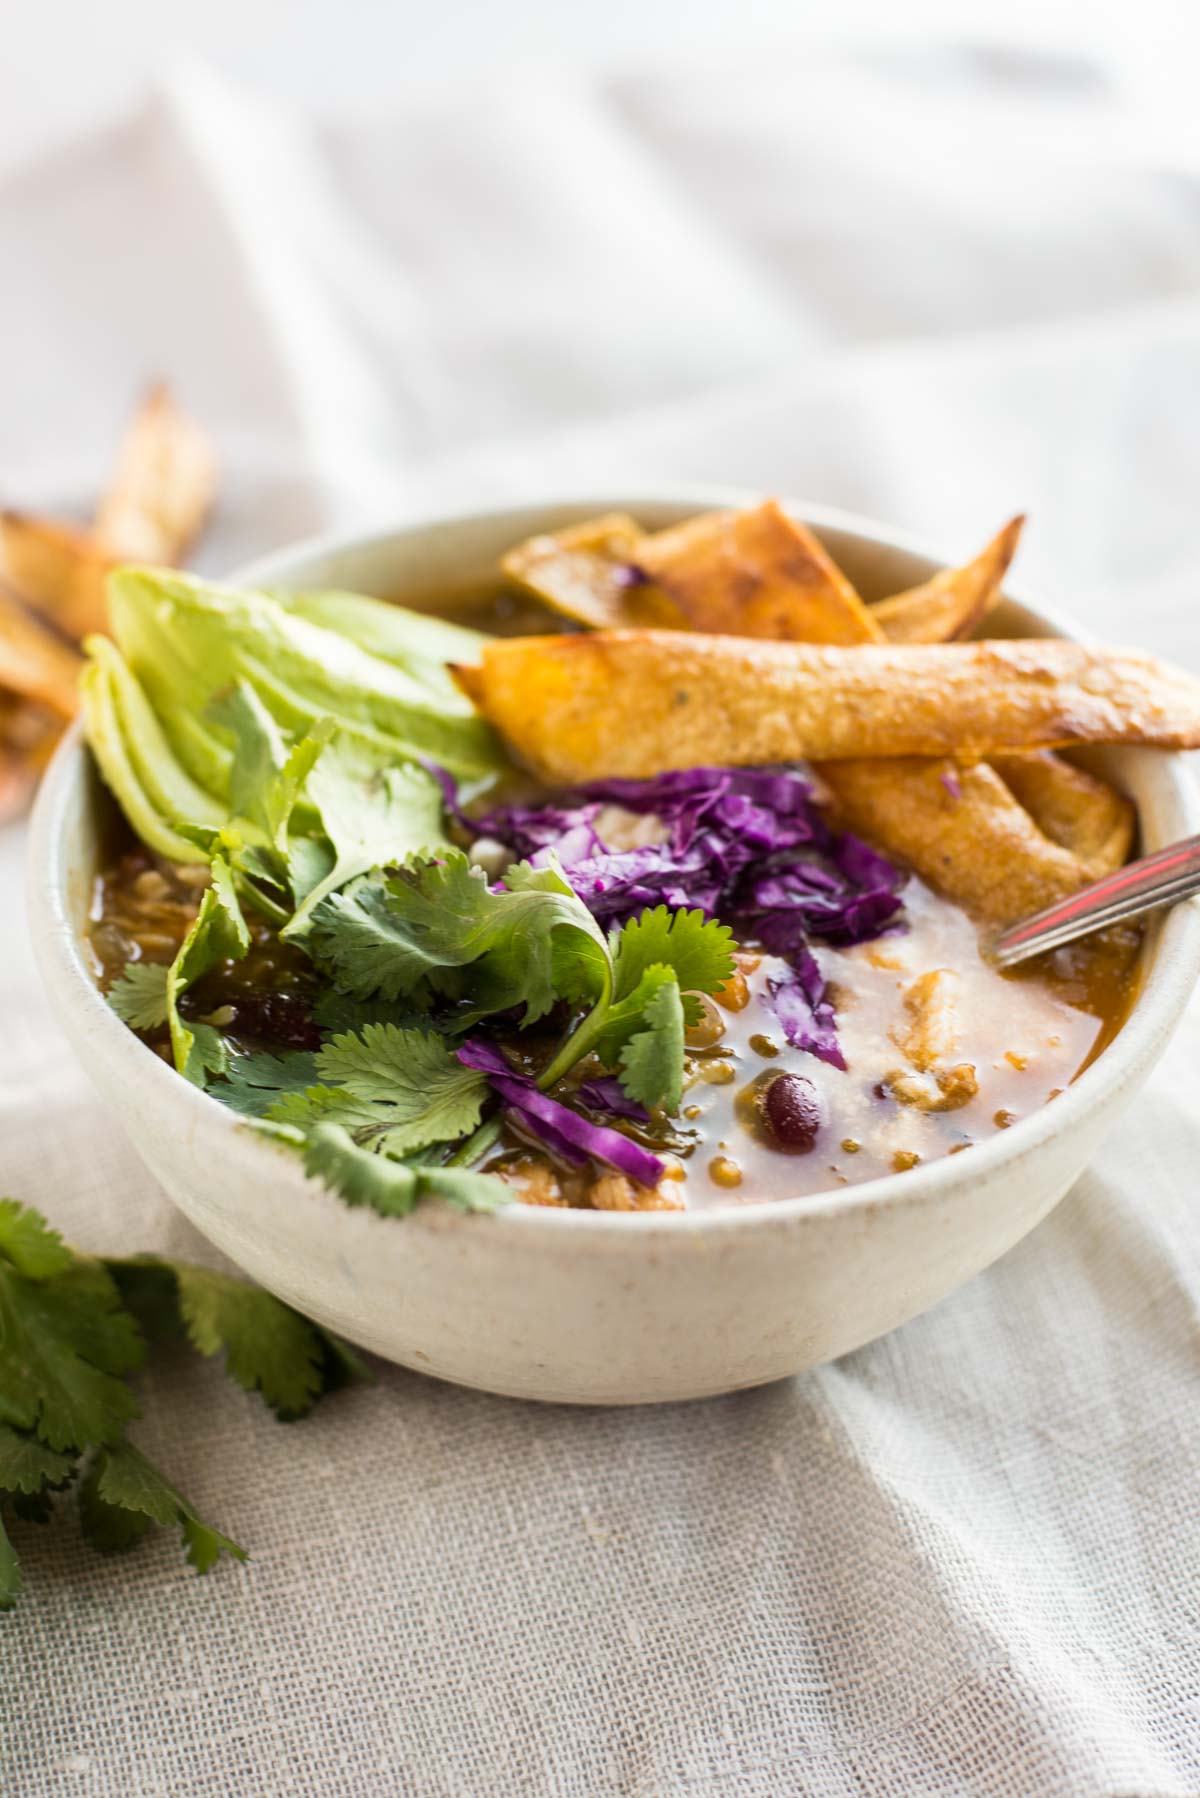 This quick and easy 20 minute meal got a make-over and contains a few simple superfoods. Add this 20-minute chipotle chicken and rice soup to your next meal plan!